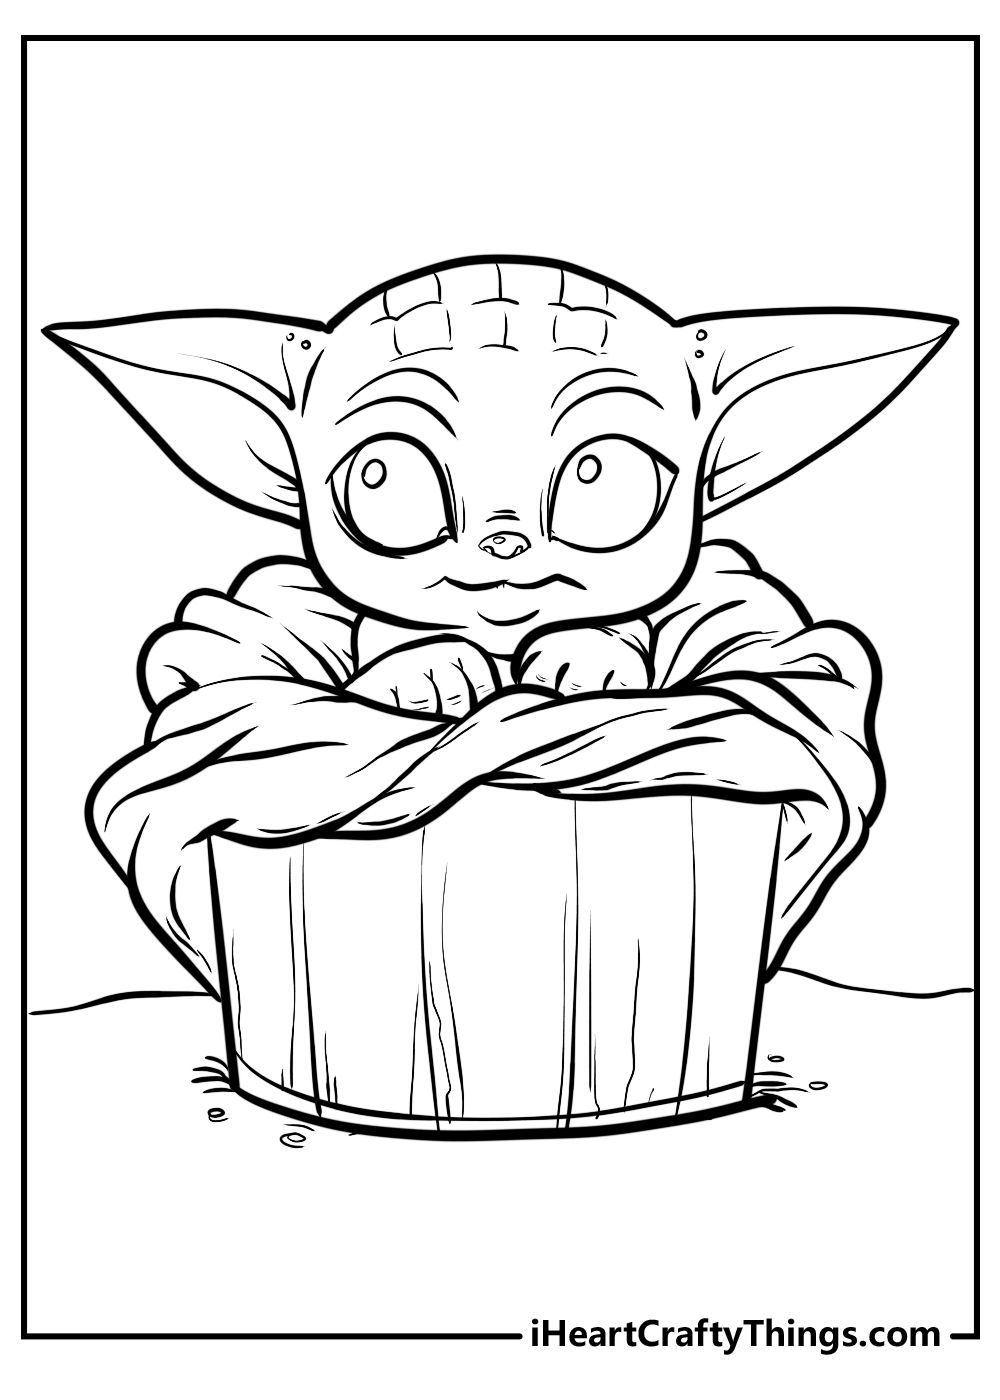 28+ Baby Yoda Coloring Pages Printable